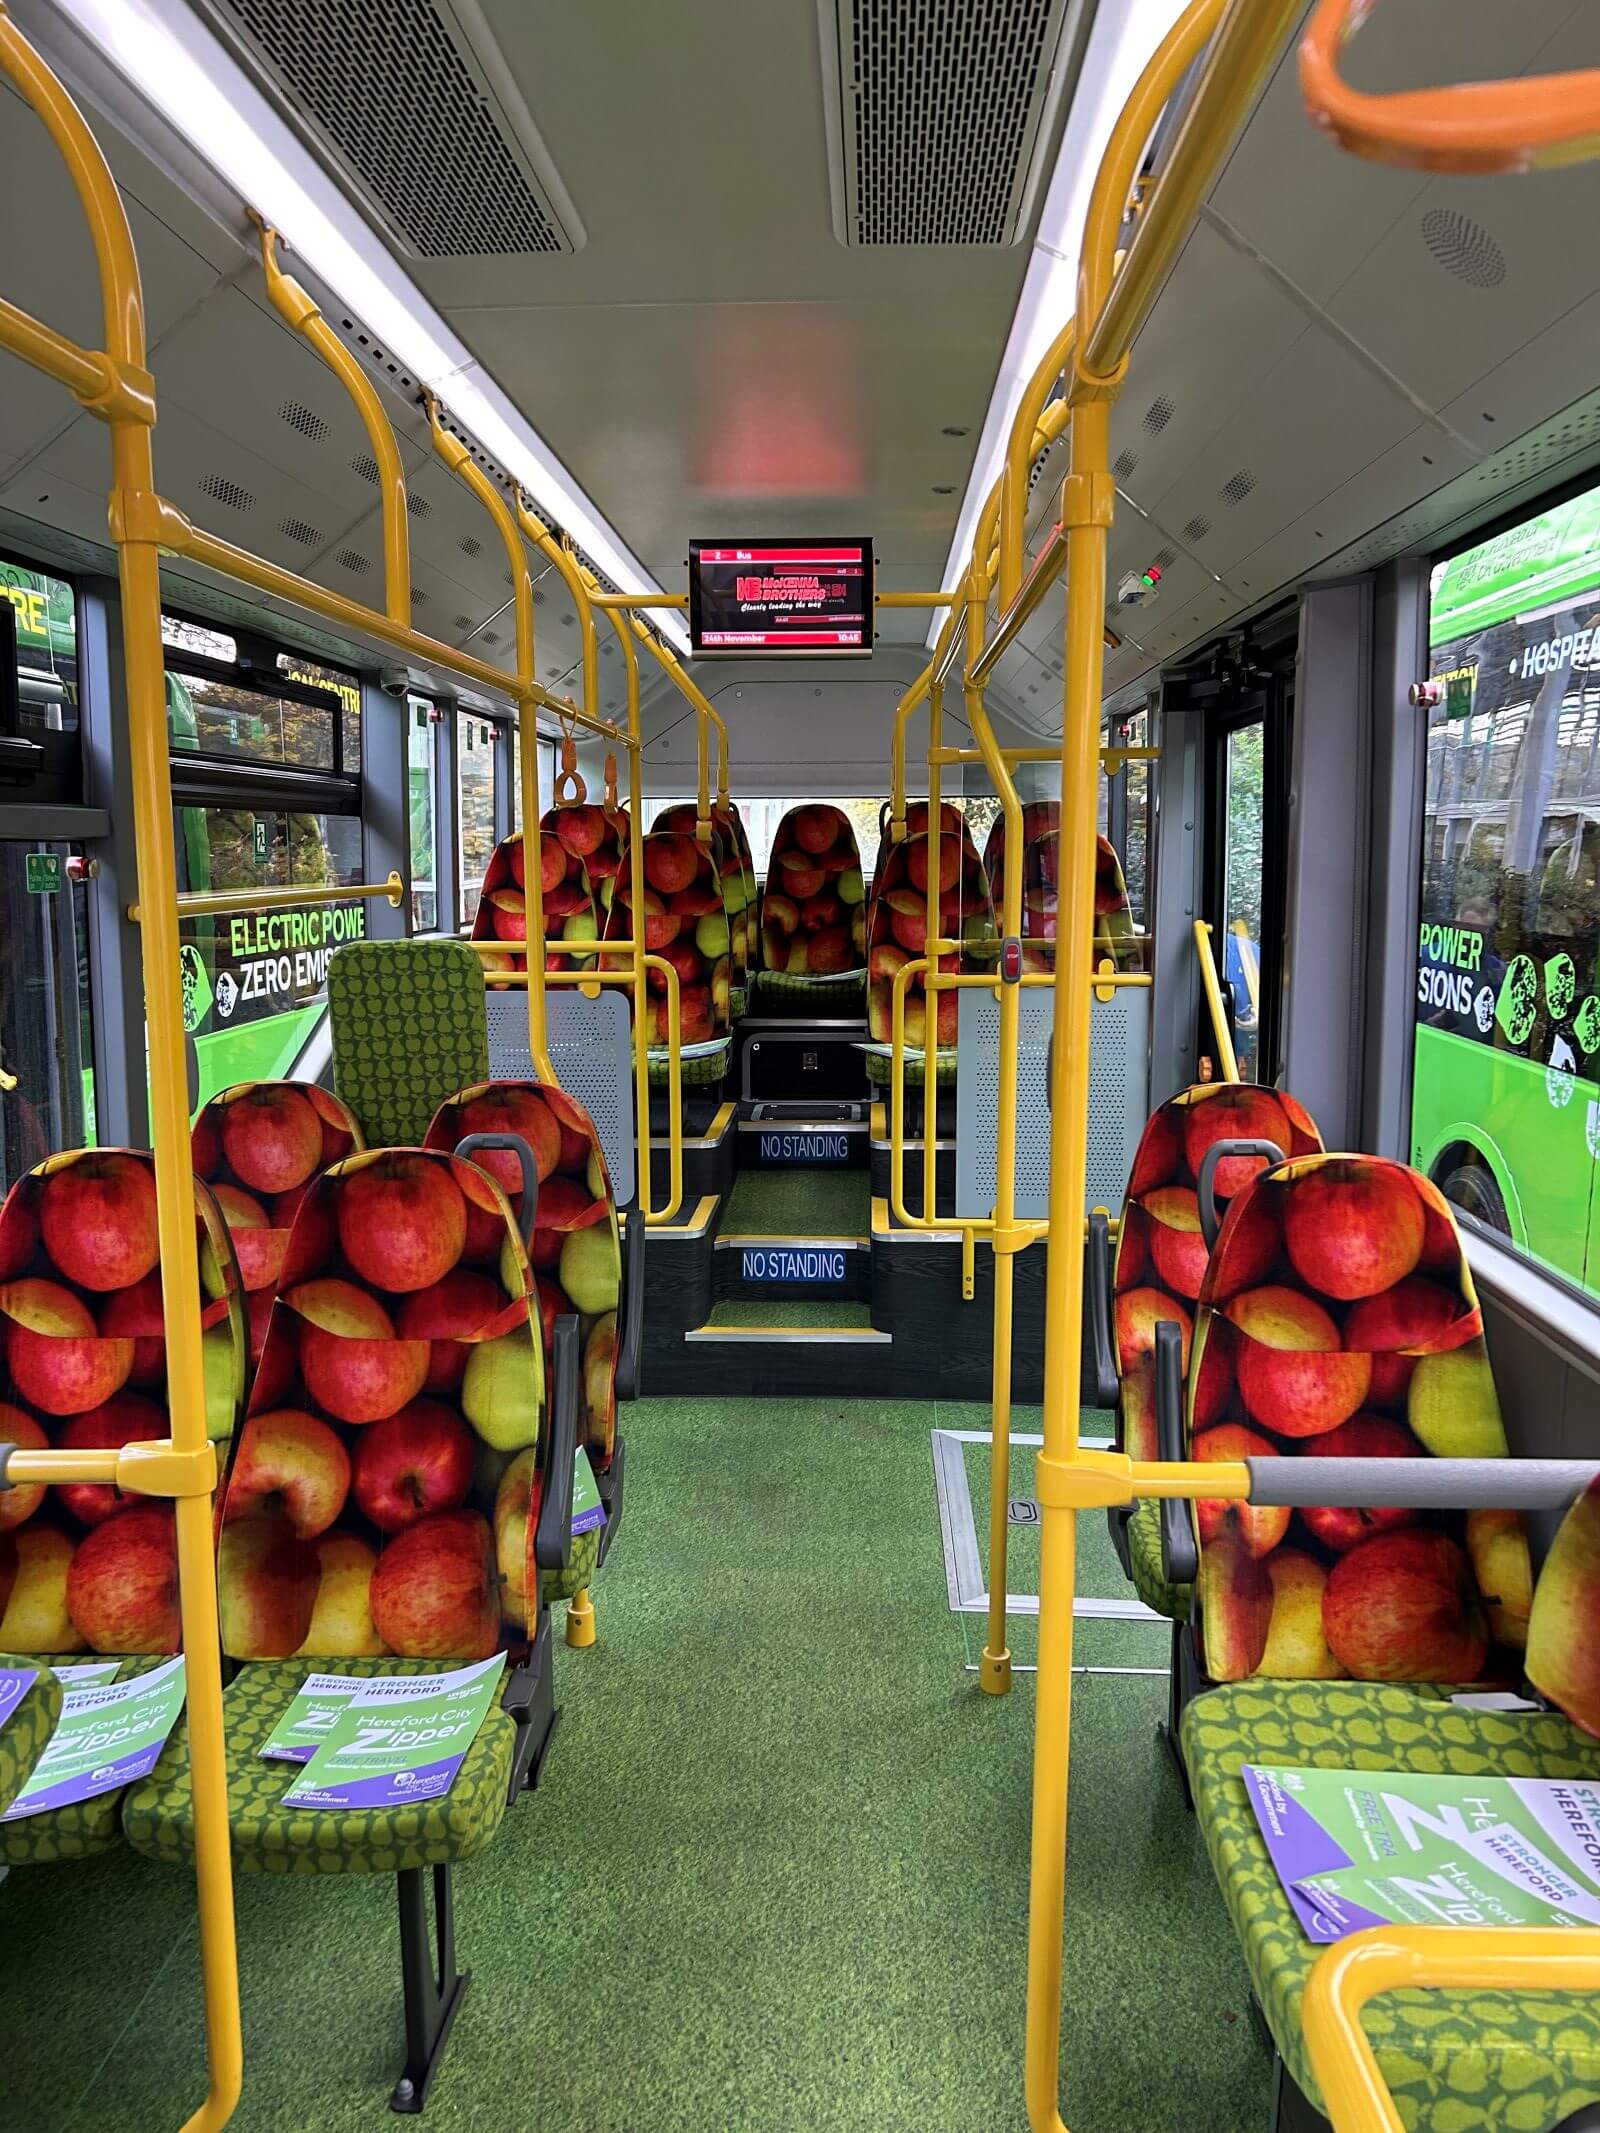 The new Hereford City Zipper buses are an imaginative nod to the area’s cider industry 